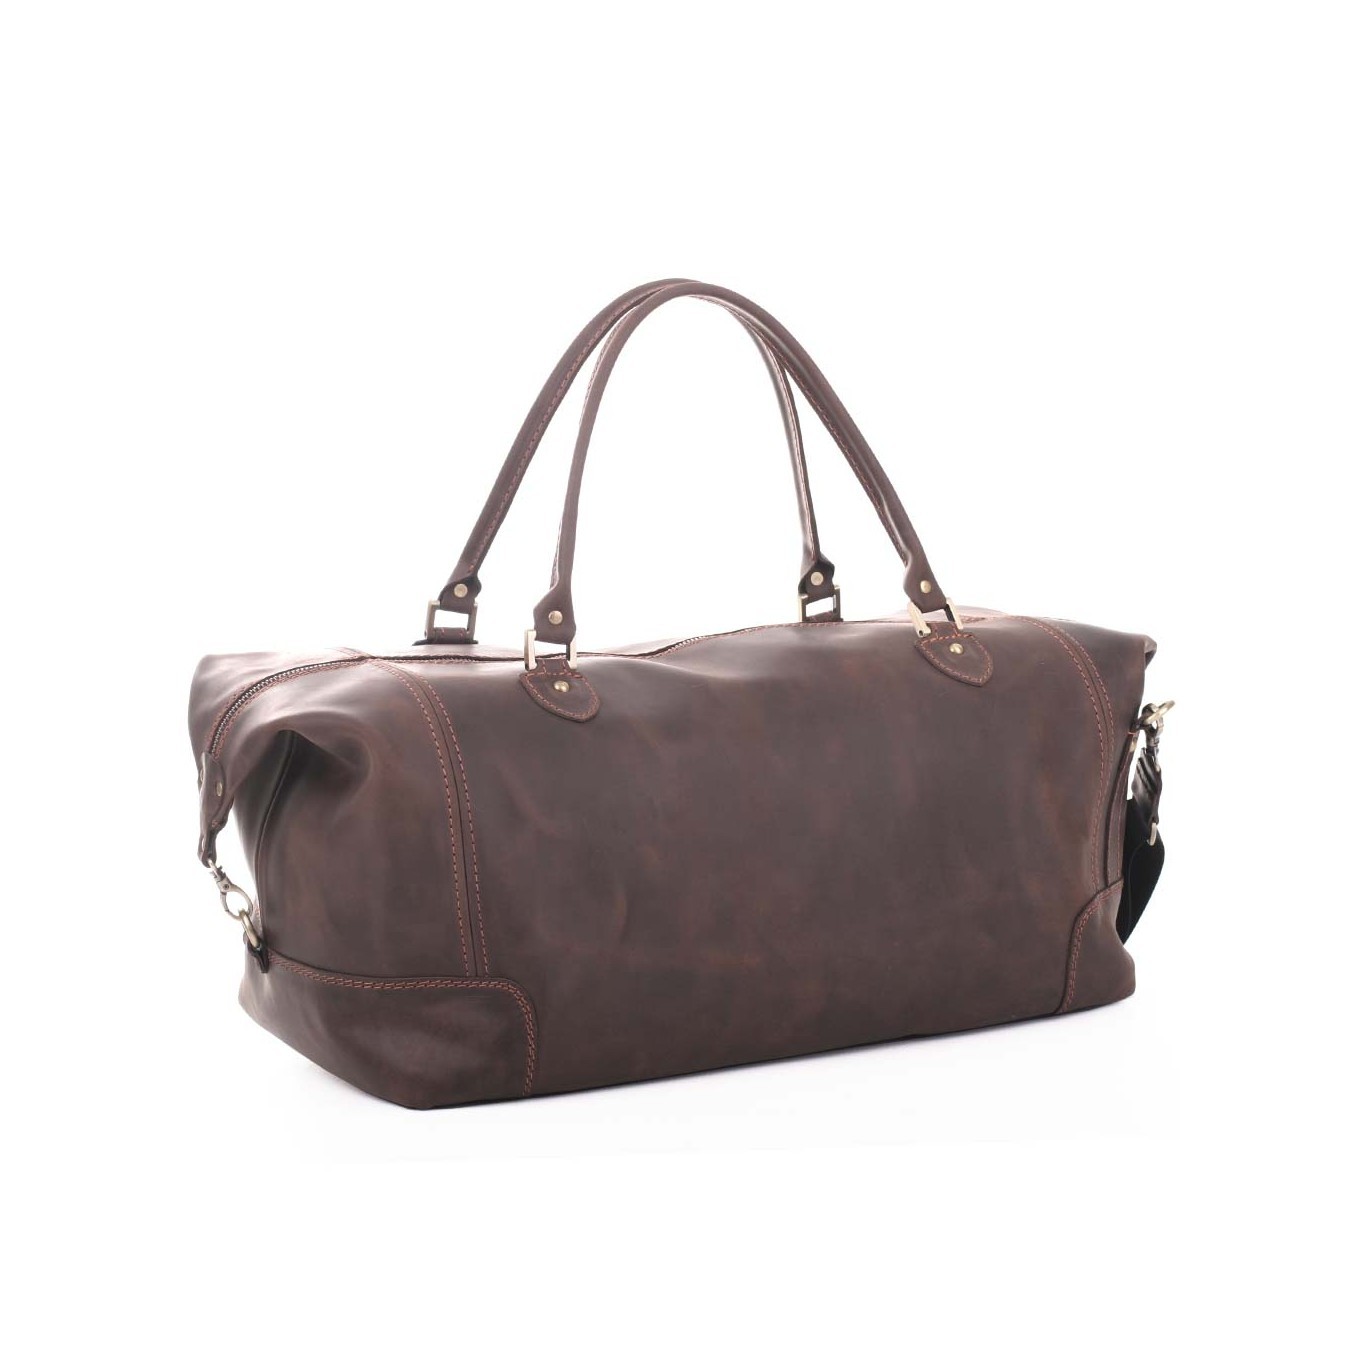 Spacious brown travel bag made of crazy horse leather